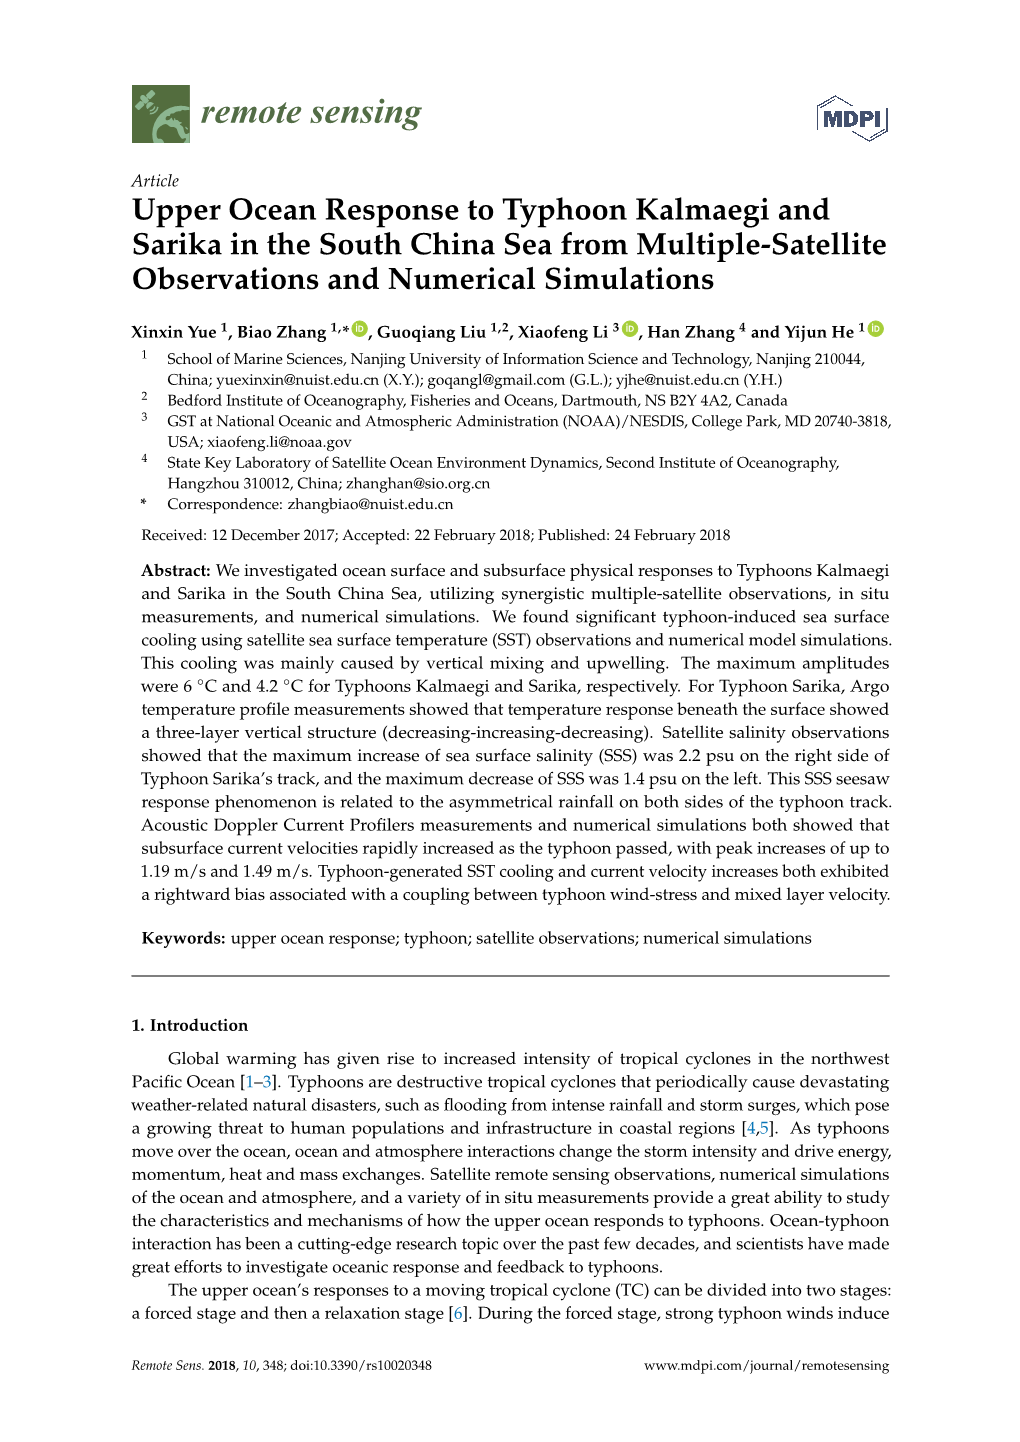 Upper Ocean Response to Typhoon Kalmaegi and Sarika in the South China Sea from Multiple-Satellite Observations and Numerical Simulations